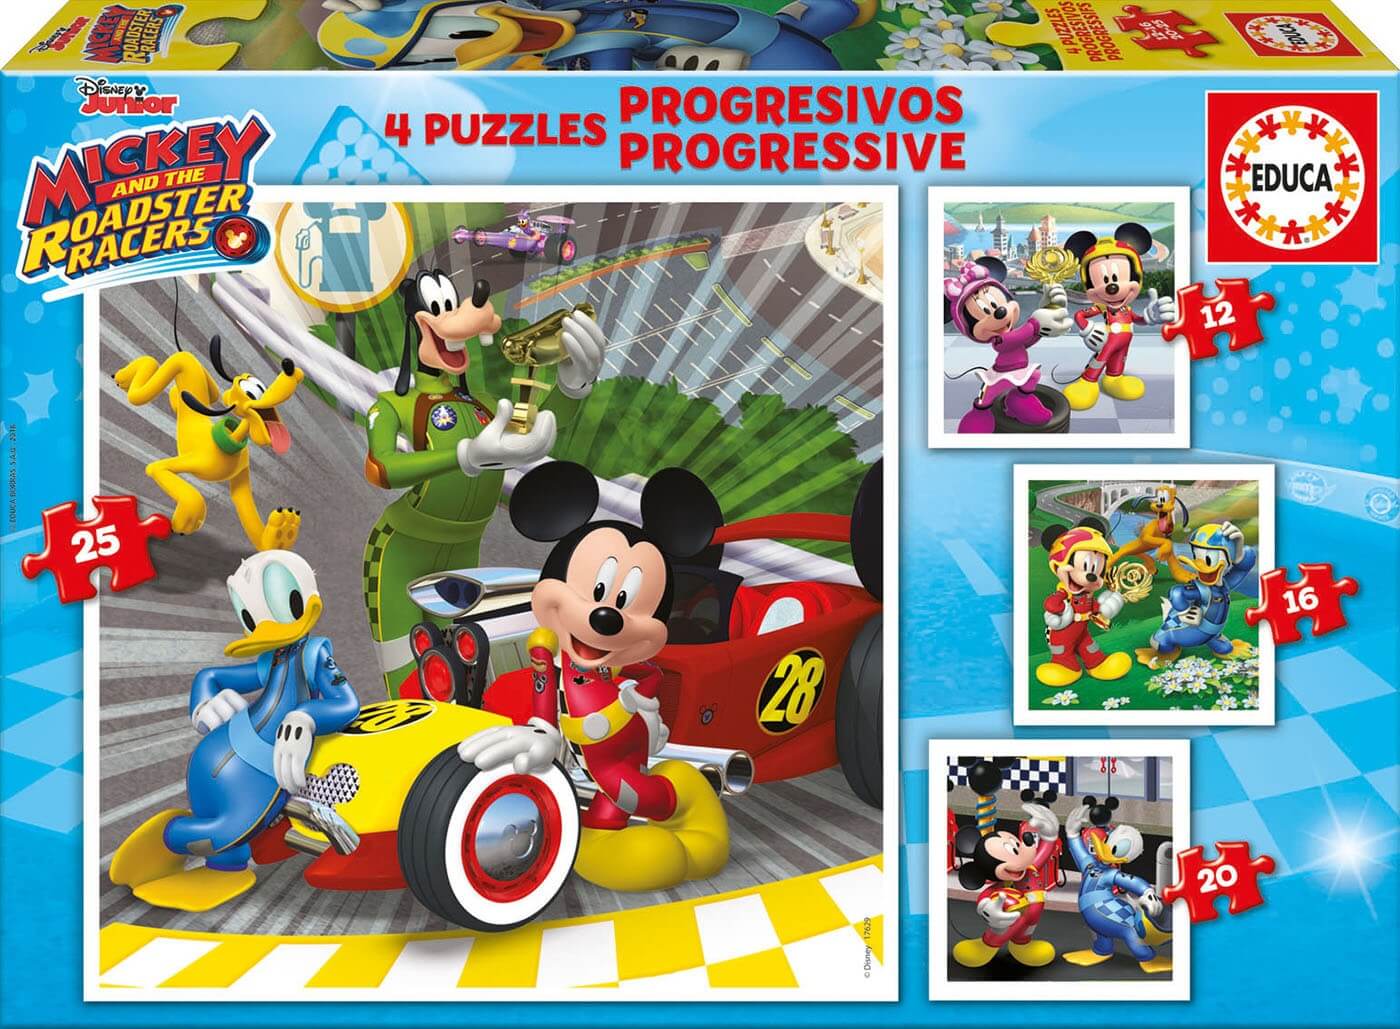 Progresivo 12-16-20-25 Mickey and The Roadster Racers